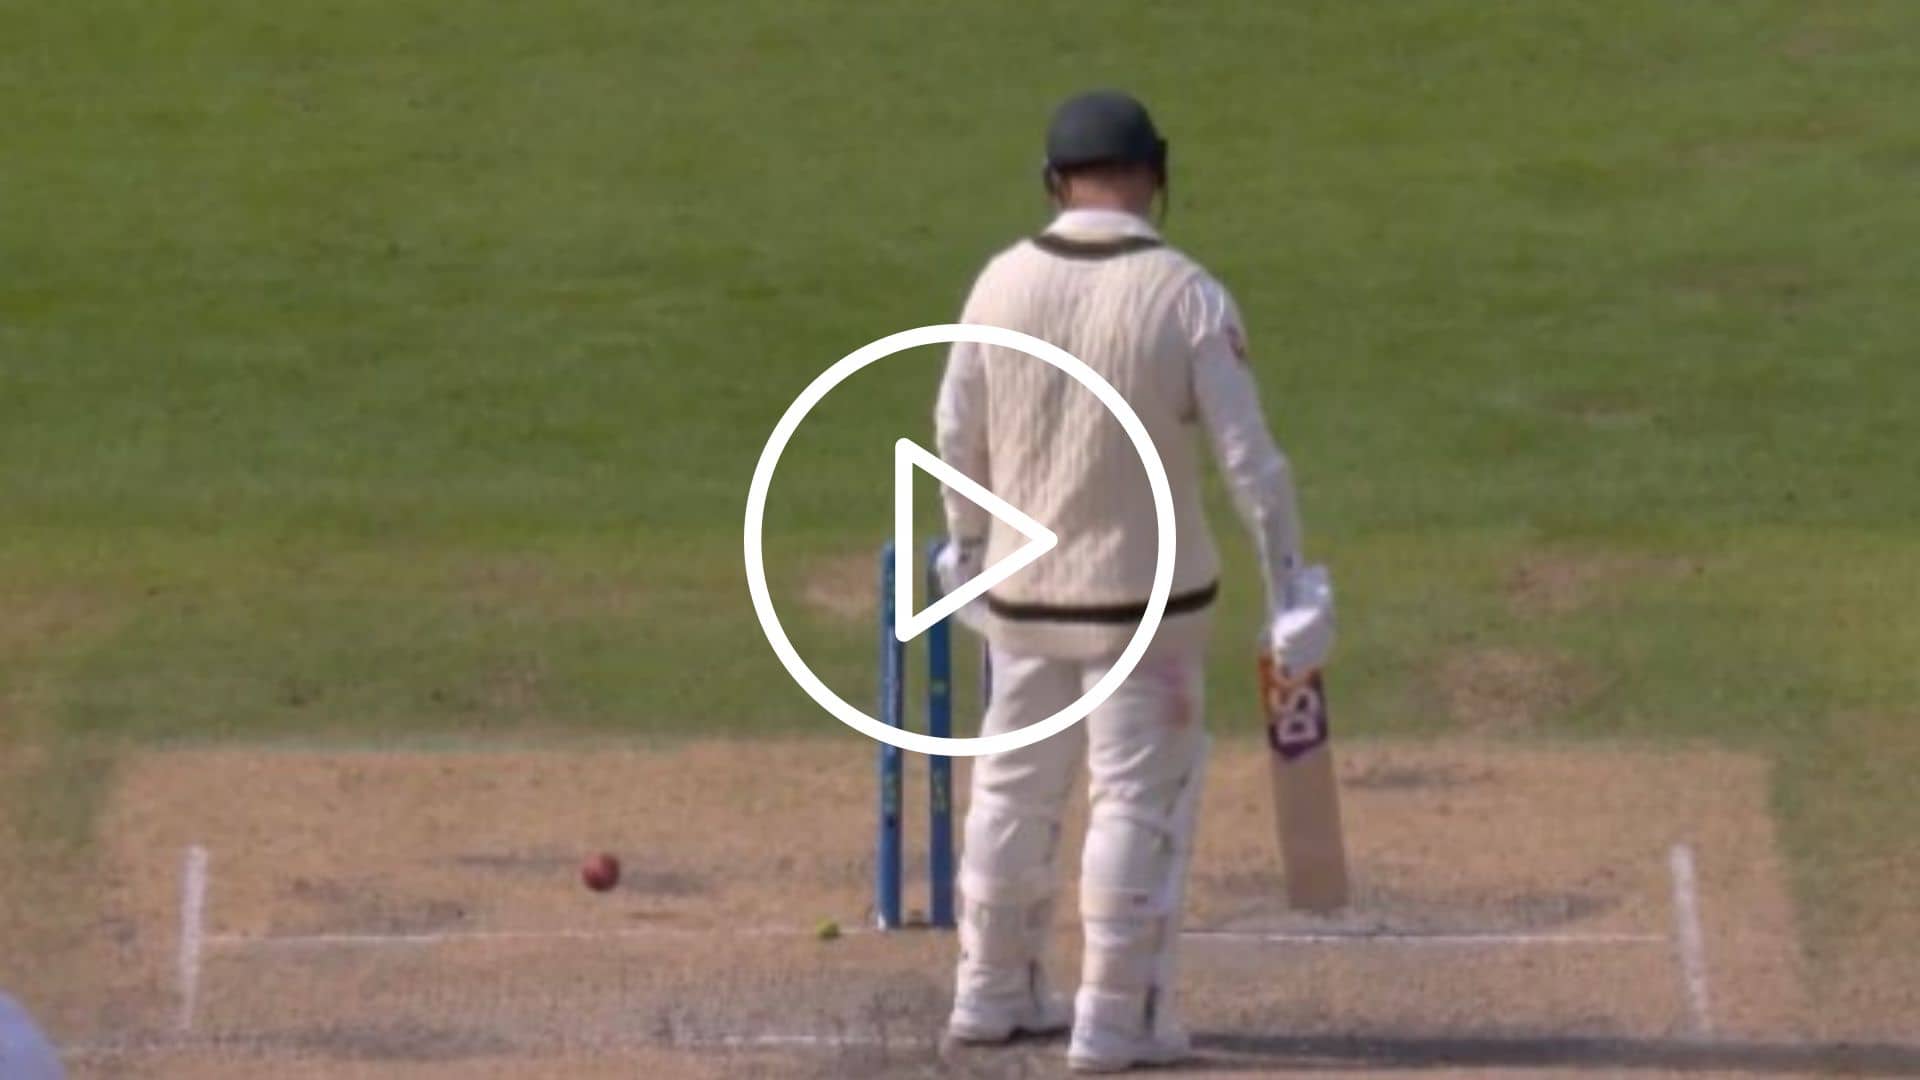 [Watch] David Warner Fails Again As Woakes Cleans Him Up With A lovely Delivery